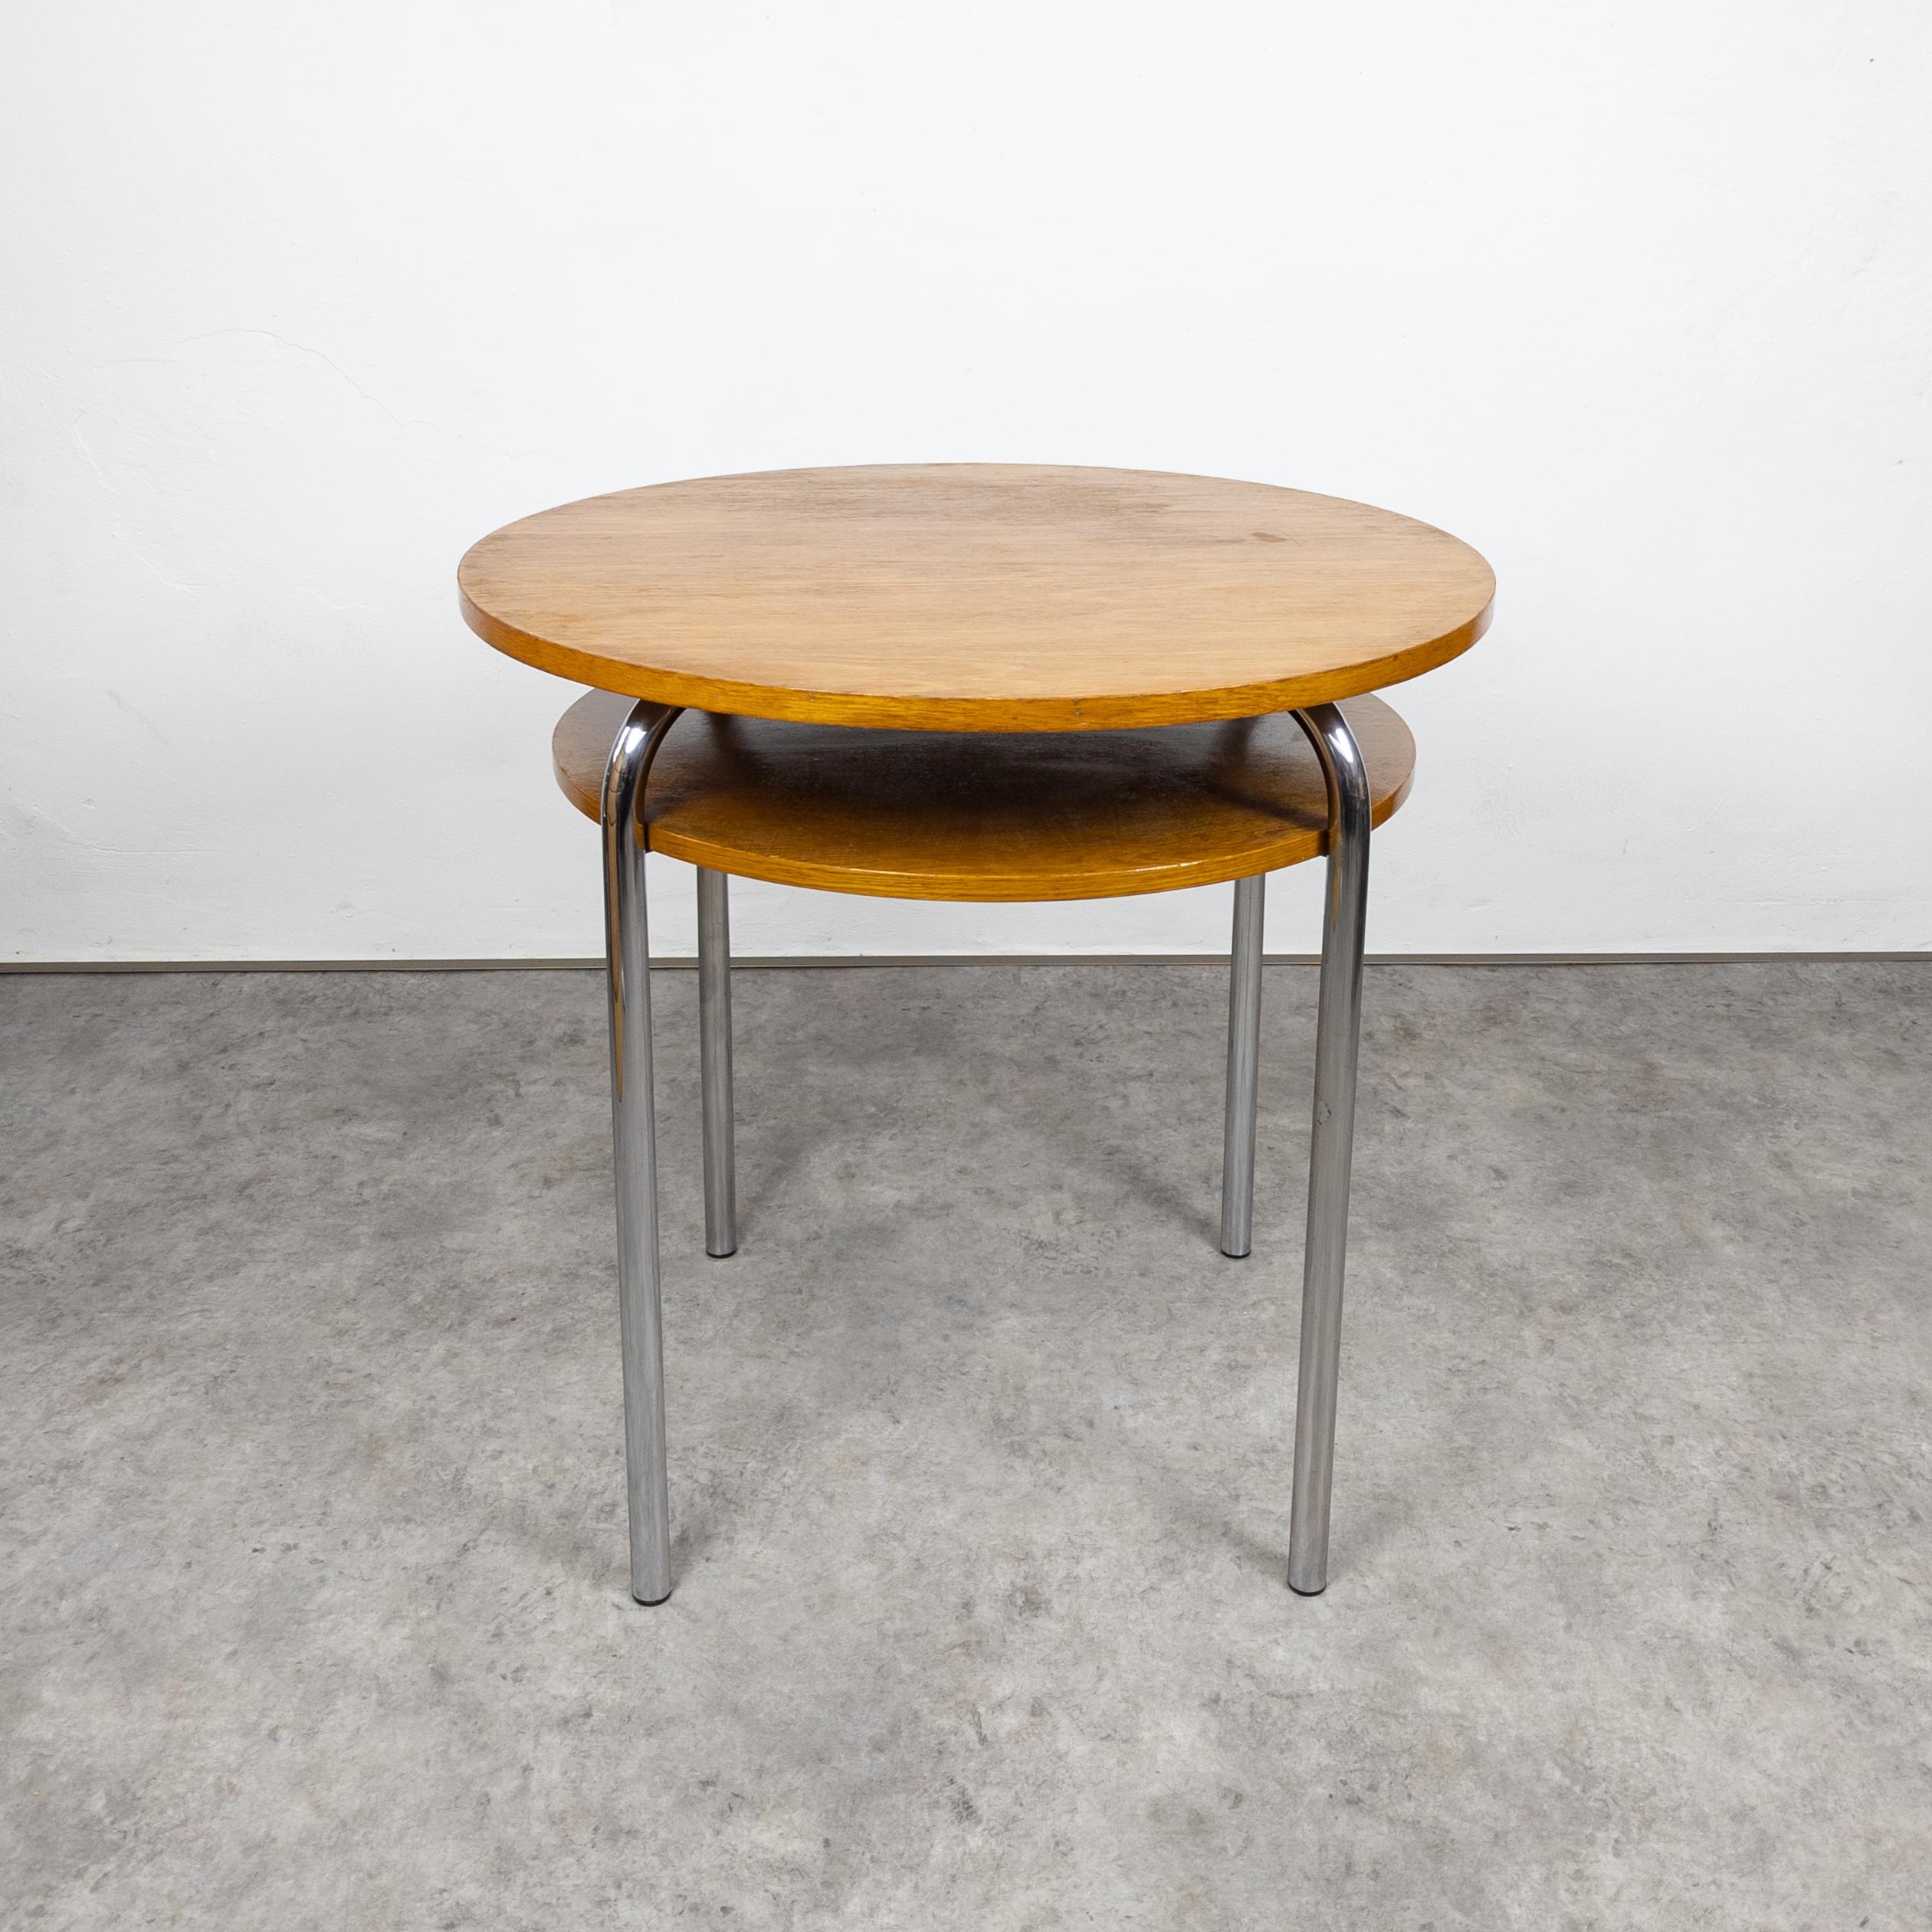 Czech Bauhaus Tubular Steel Table by Petr Vichr for Vichr a Spol For Sale